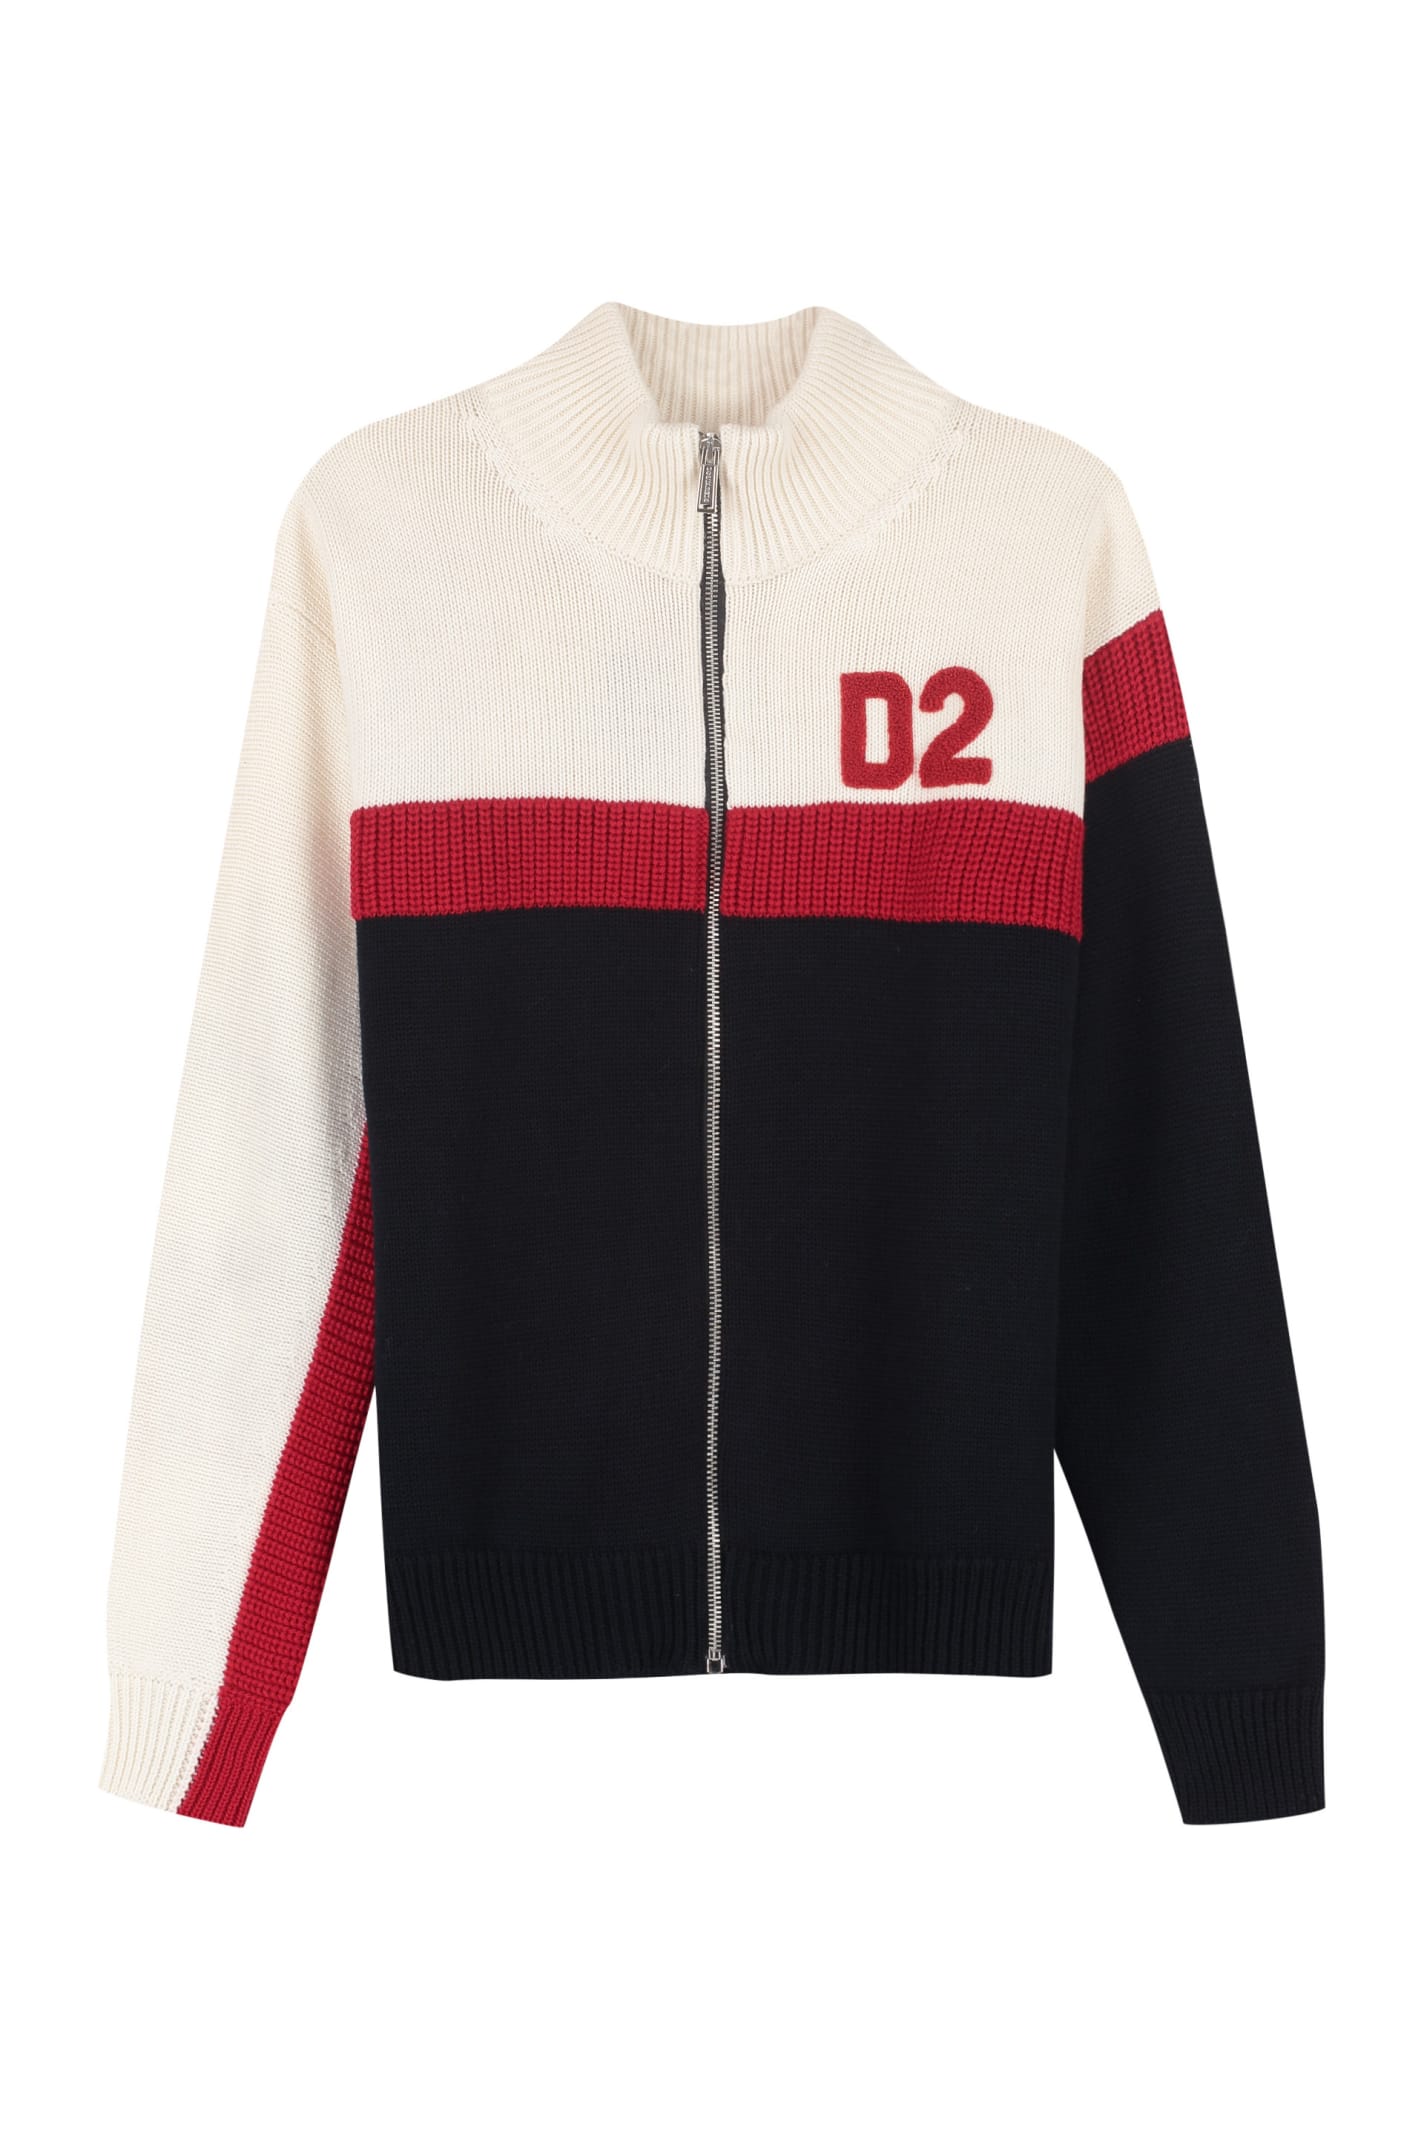 Dsquared2 Wool-blend Stand-up Collar Sweater